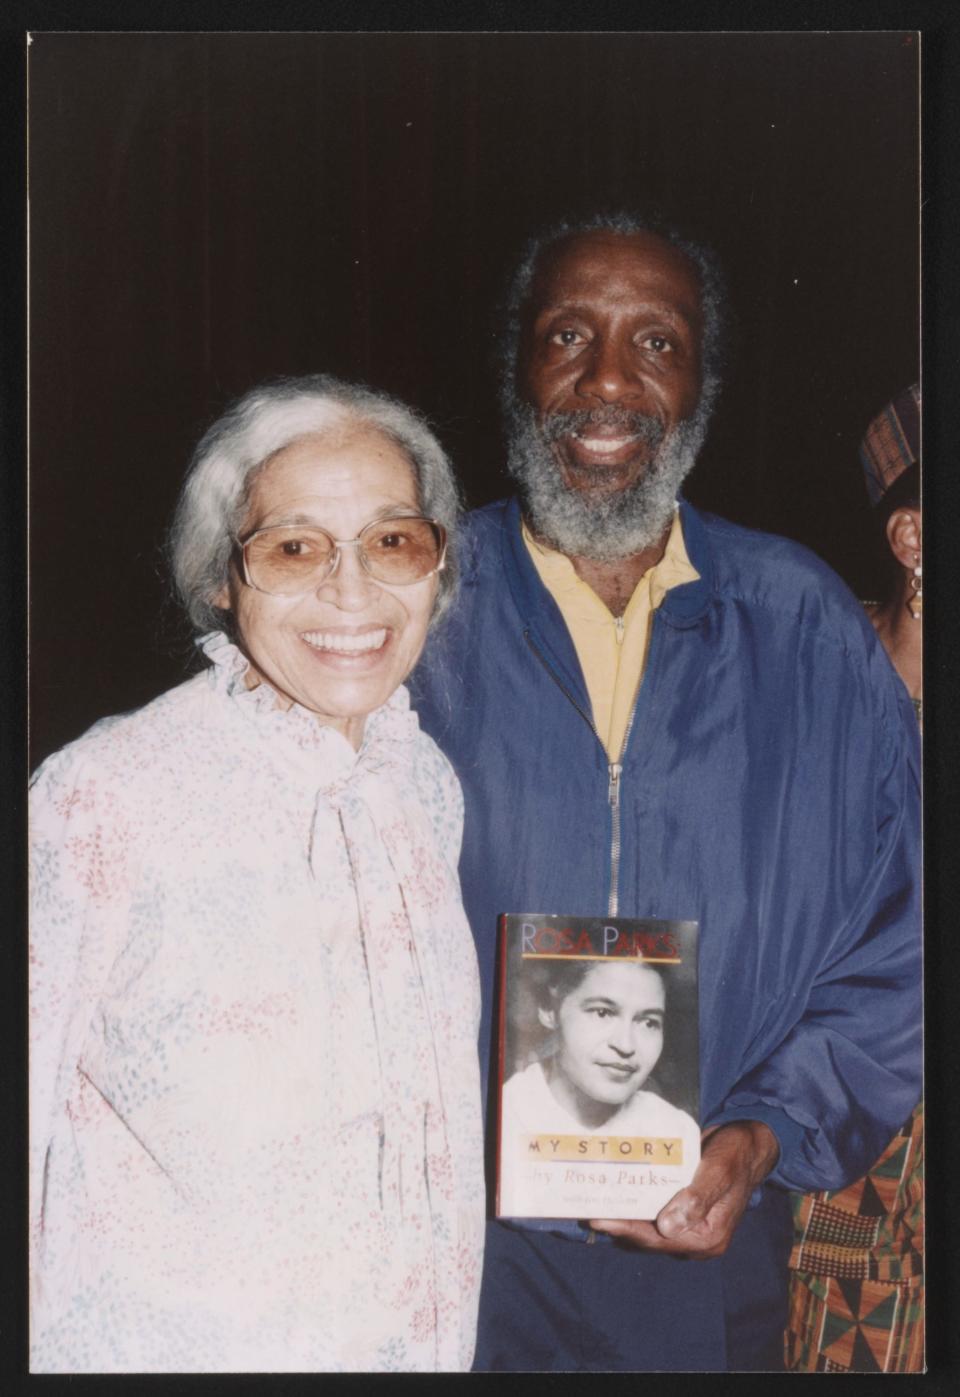 Comedian Dick Gregory, here with civil rights icon Rosa Parks in a photo from the Rosa Parks Papers. [Via MerlinFTP Drop]